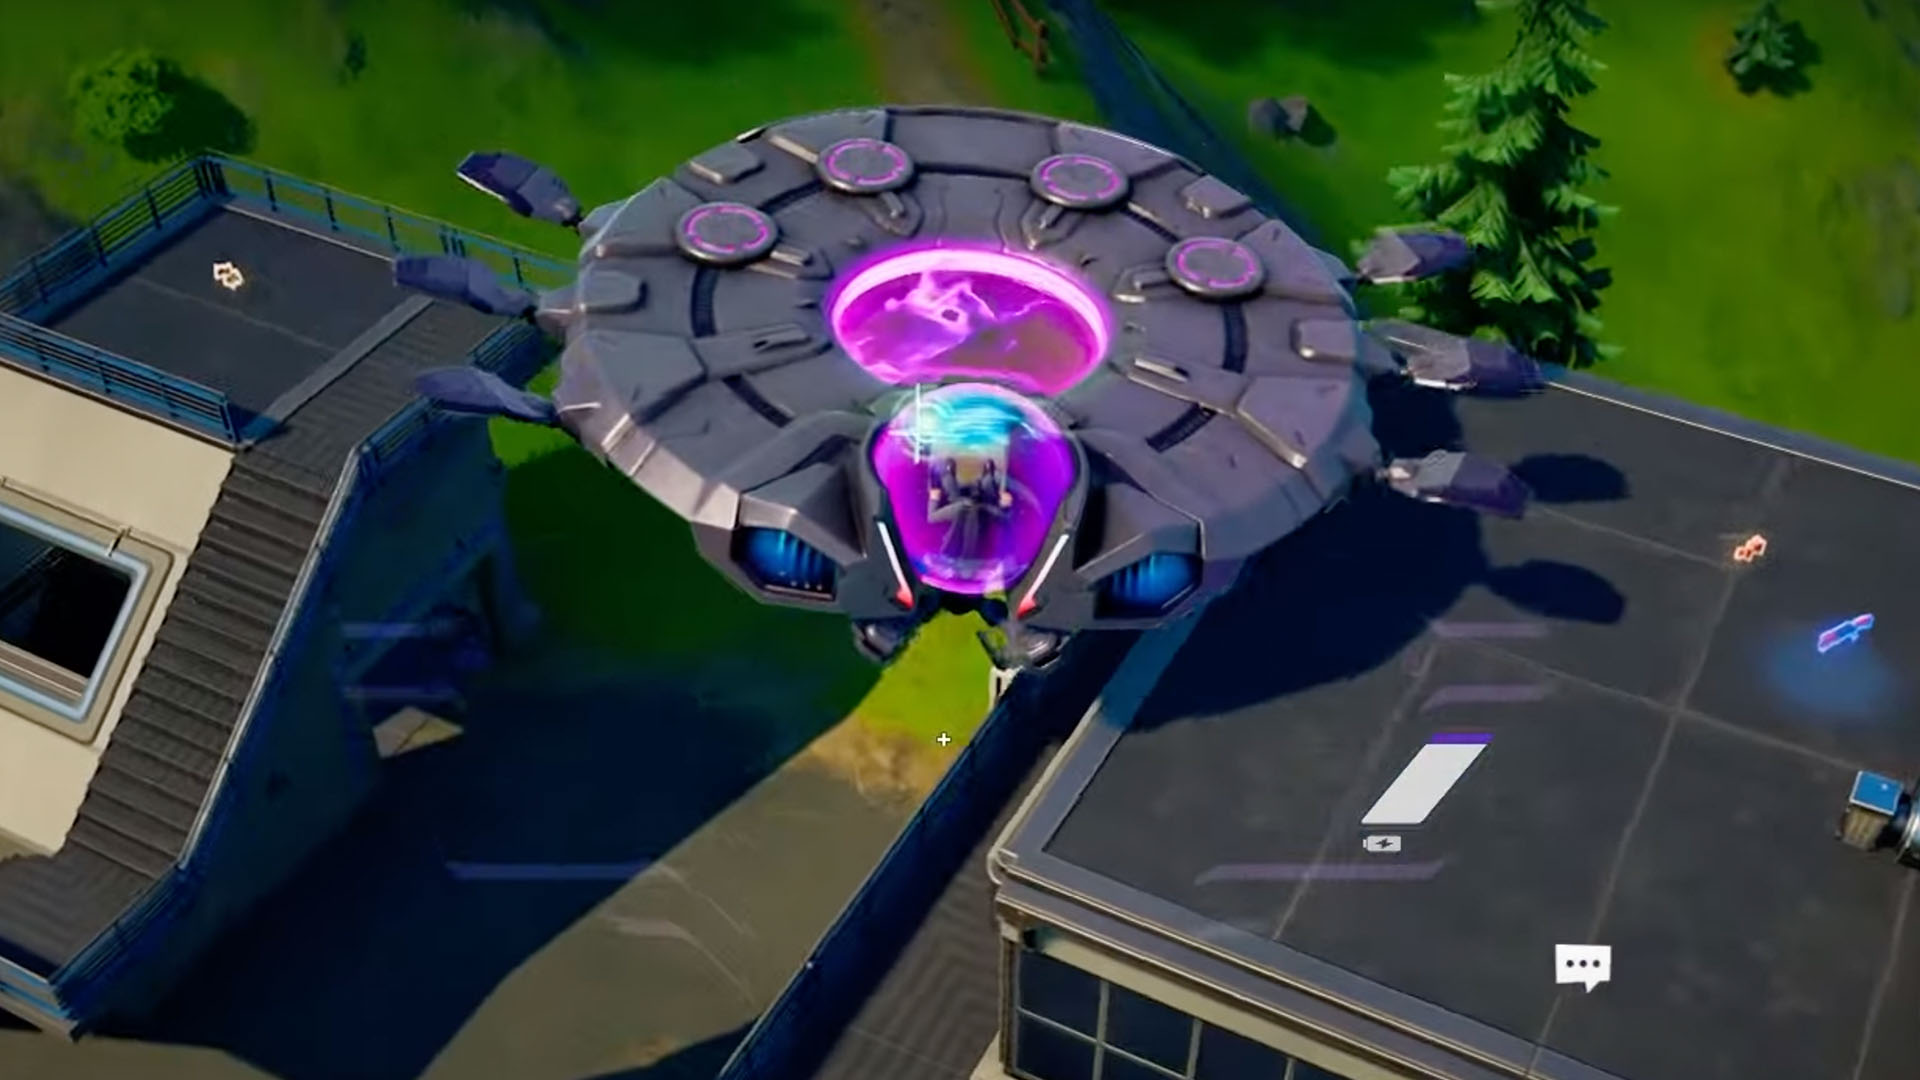 How to deliver a saucer to Rick Sanchez at Defiant Dish in Fortnite